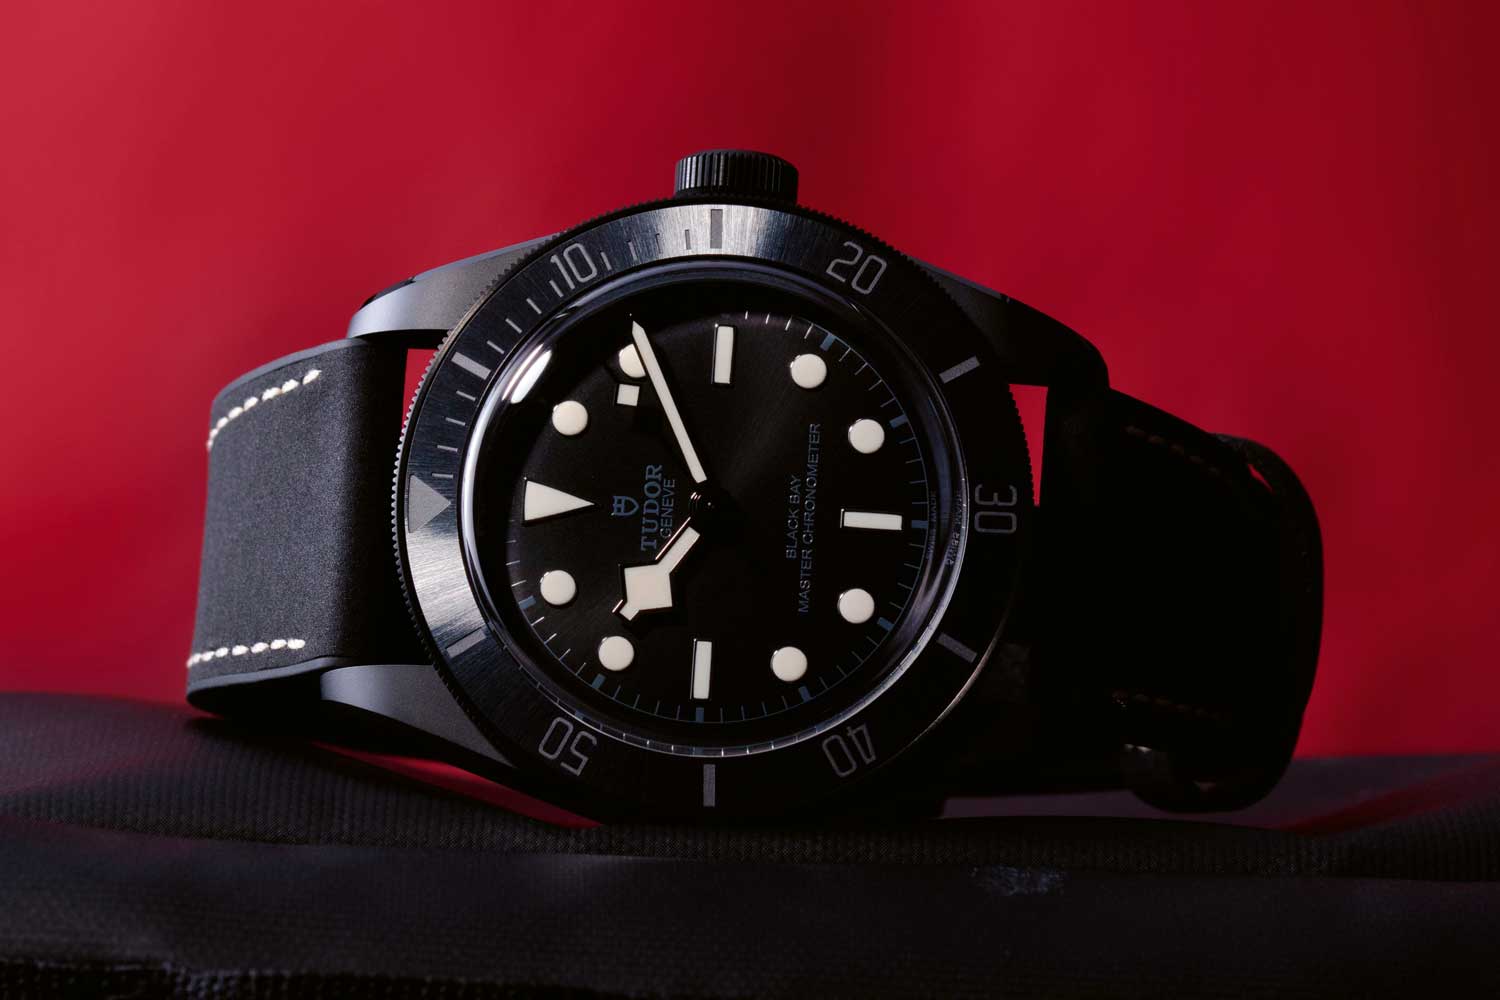 Stealth, quality and precision are the defining design tenets of the Tudor Black Bay Ceramic Master Chronometer